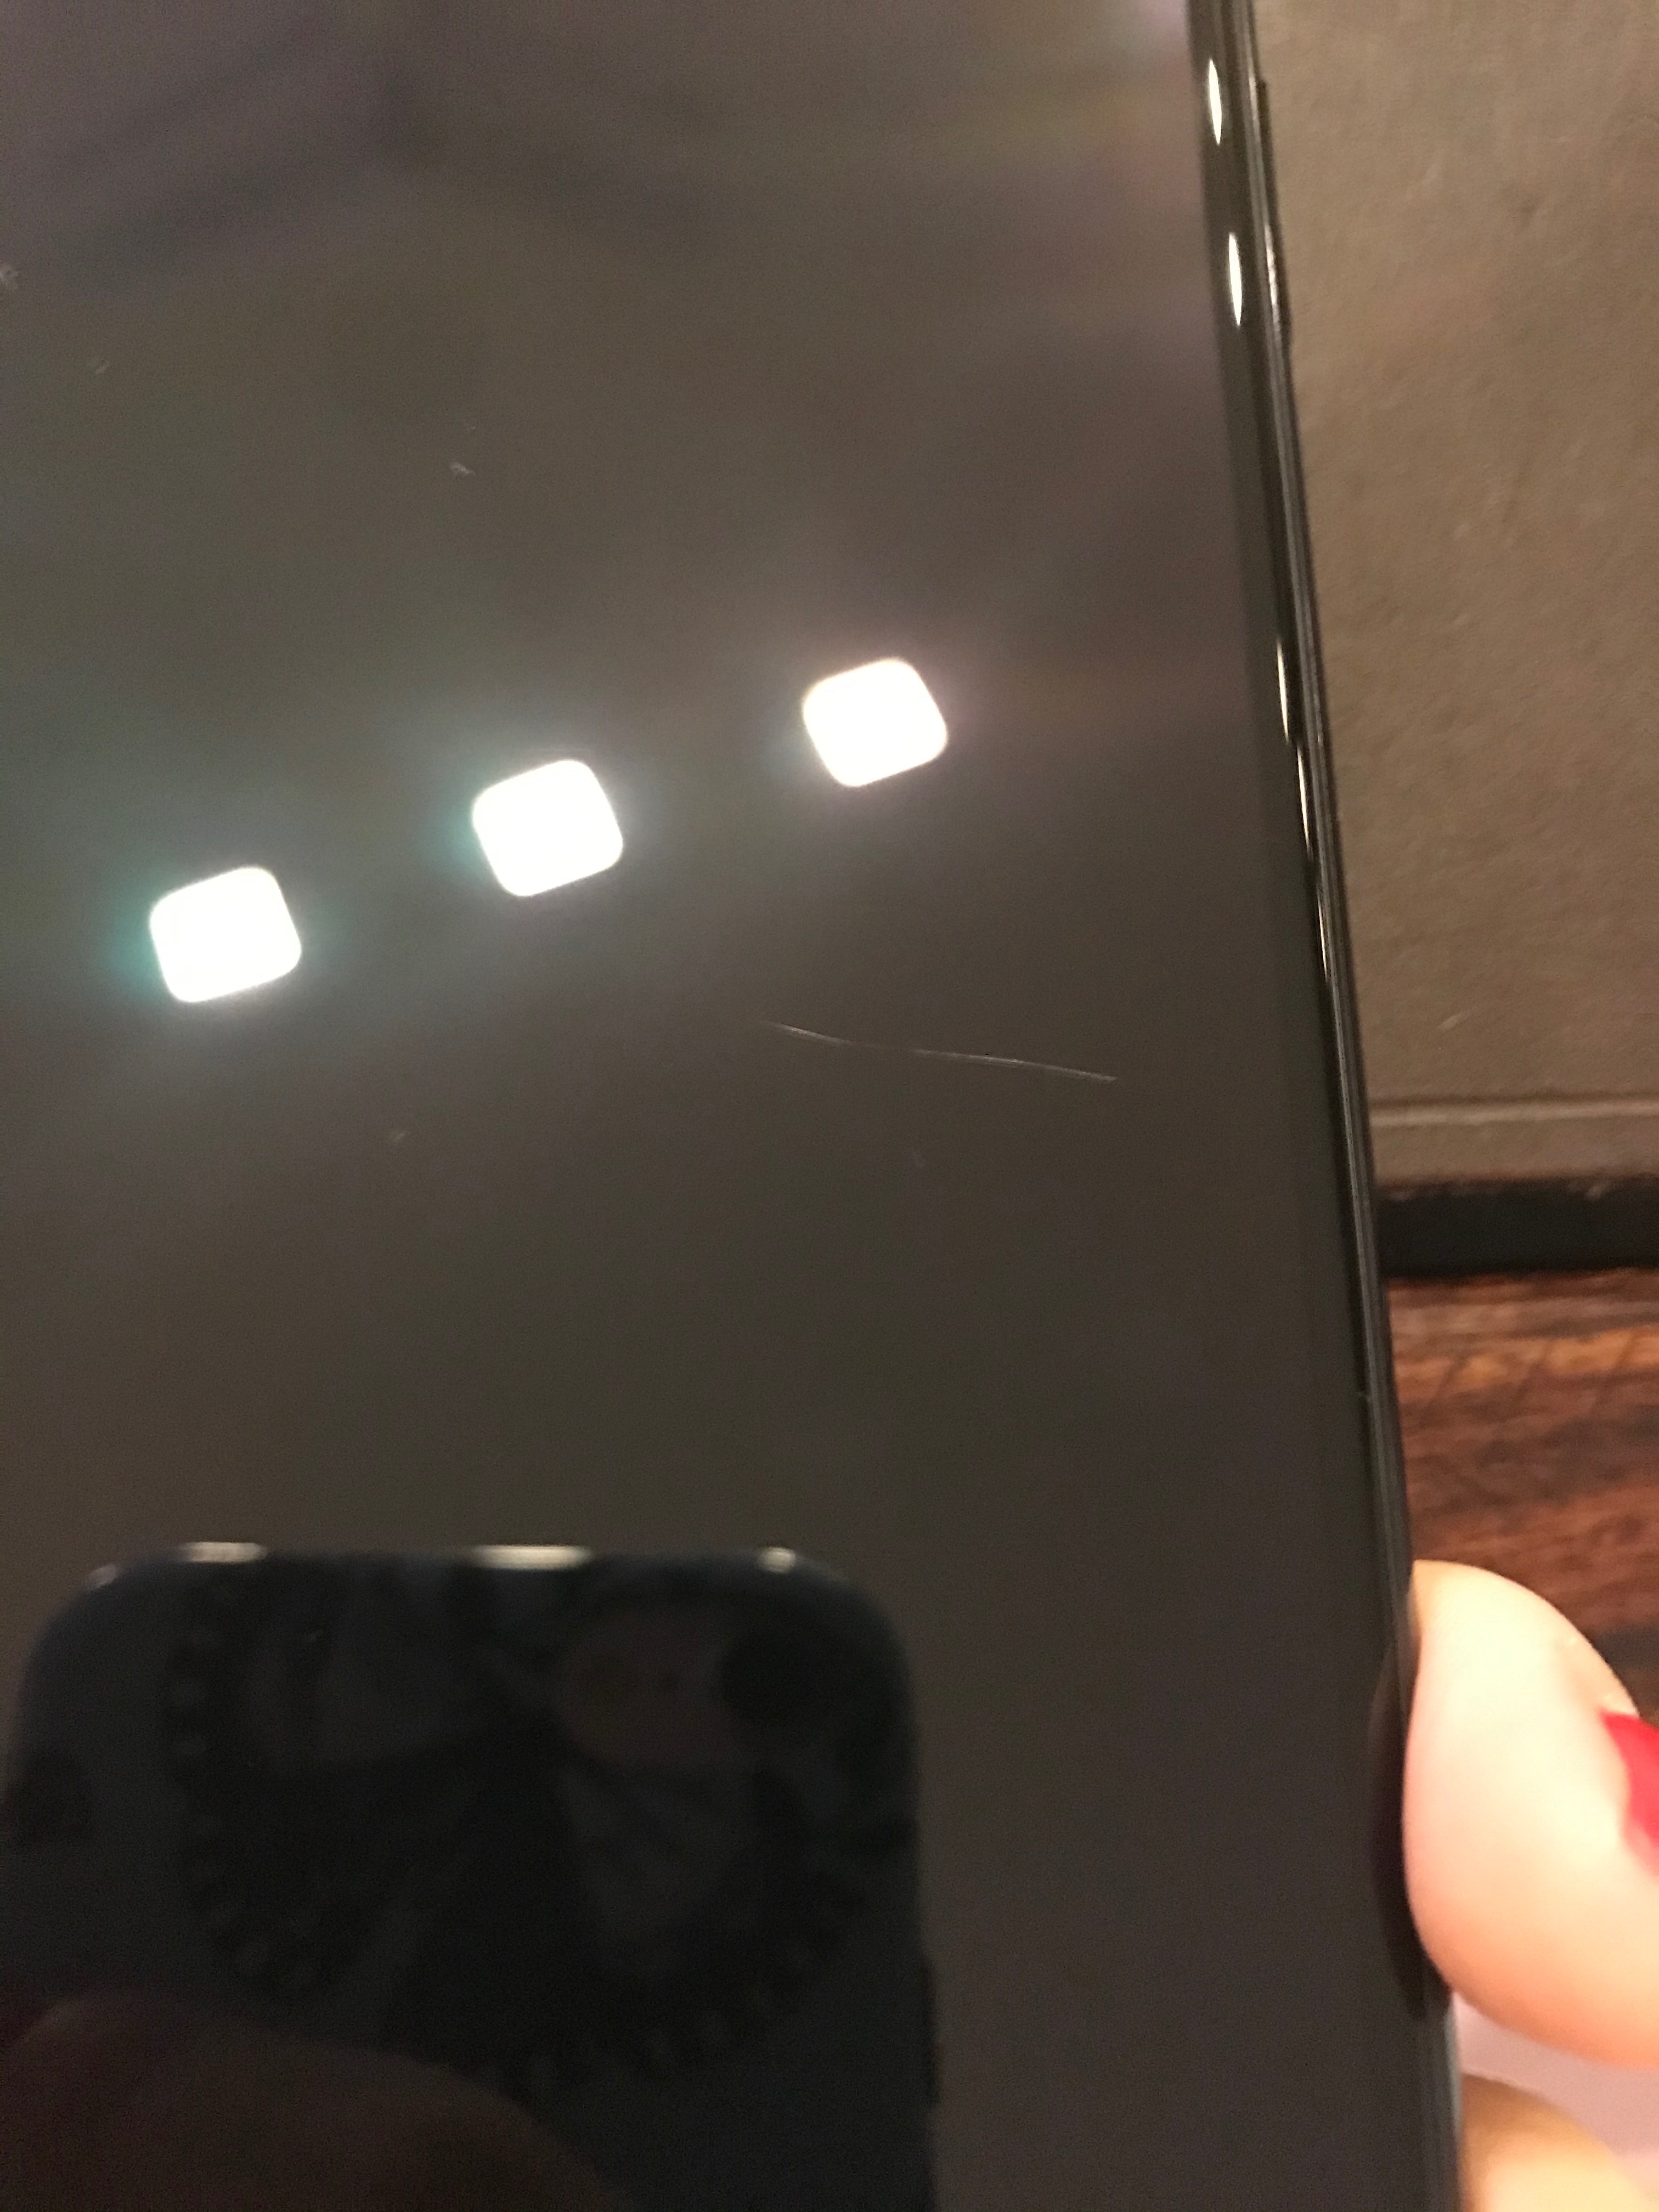 Does Apple Store fix scratches?